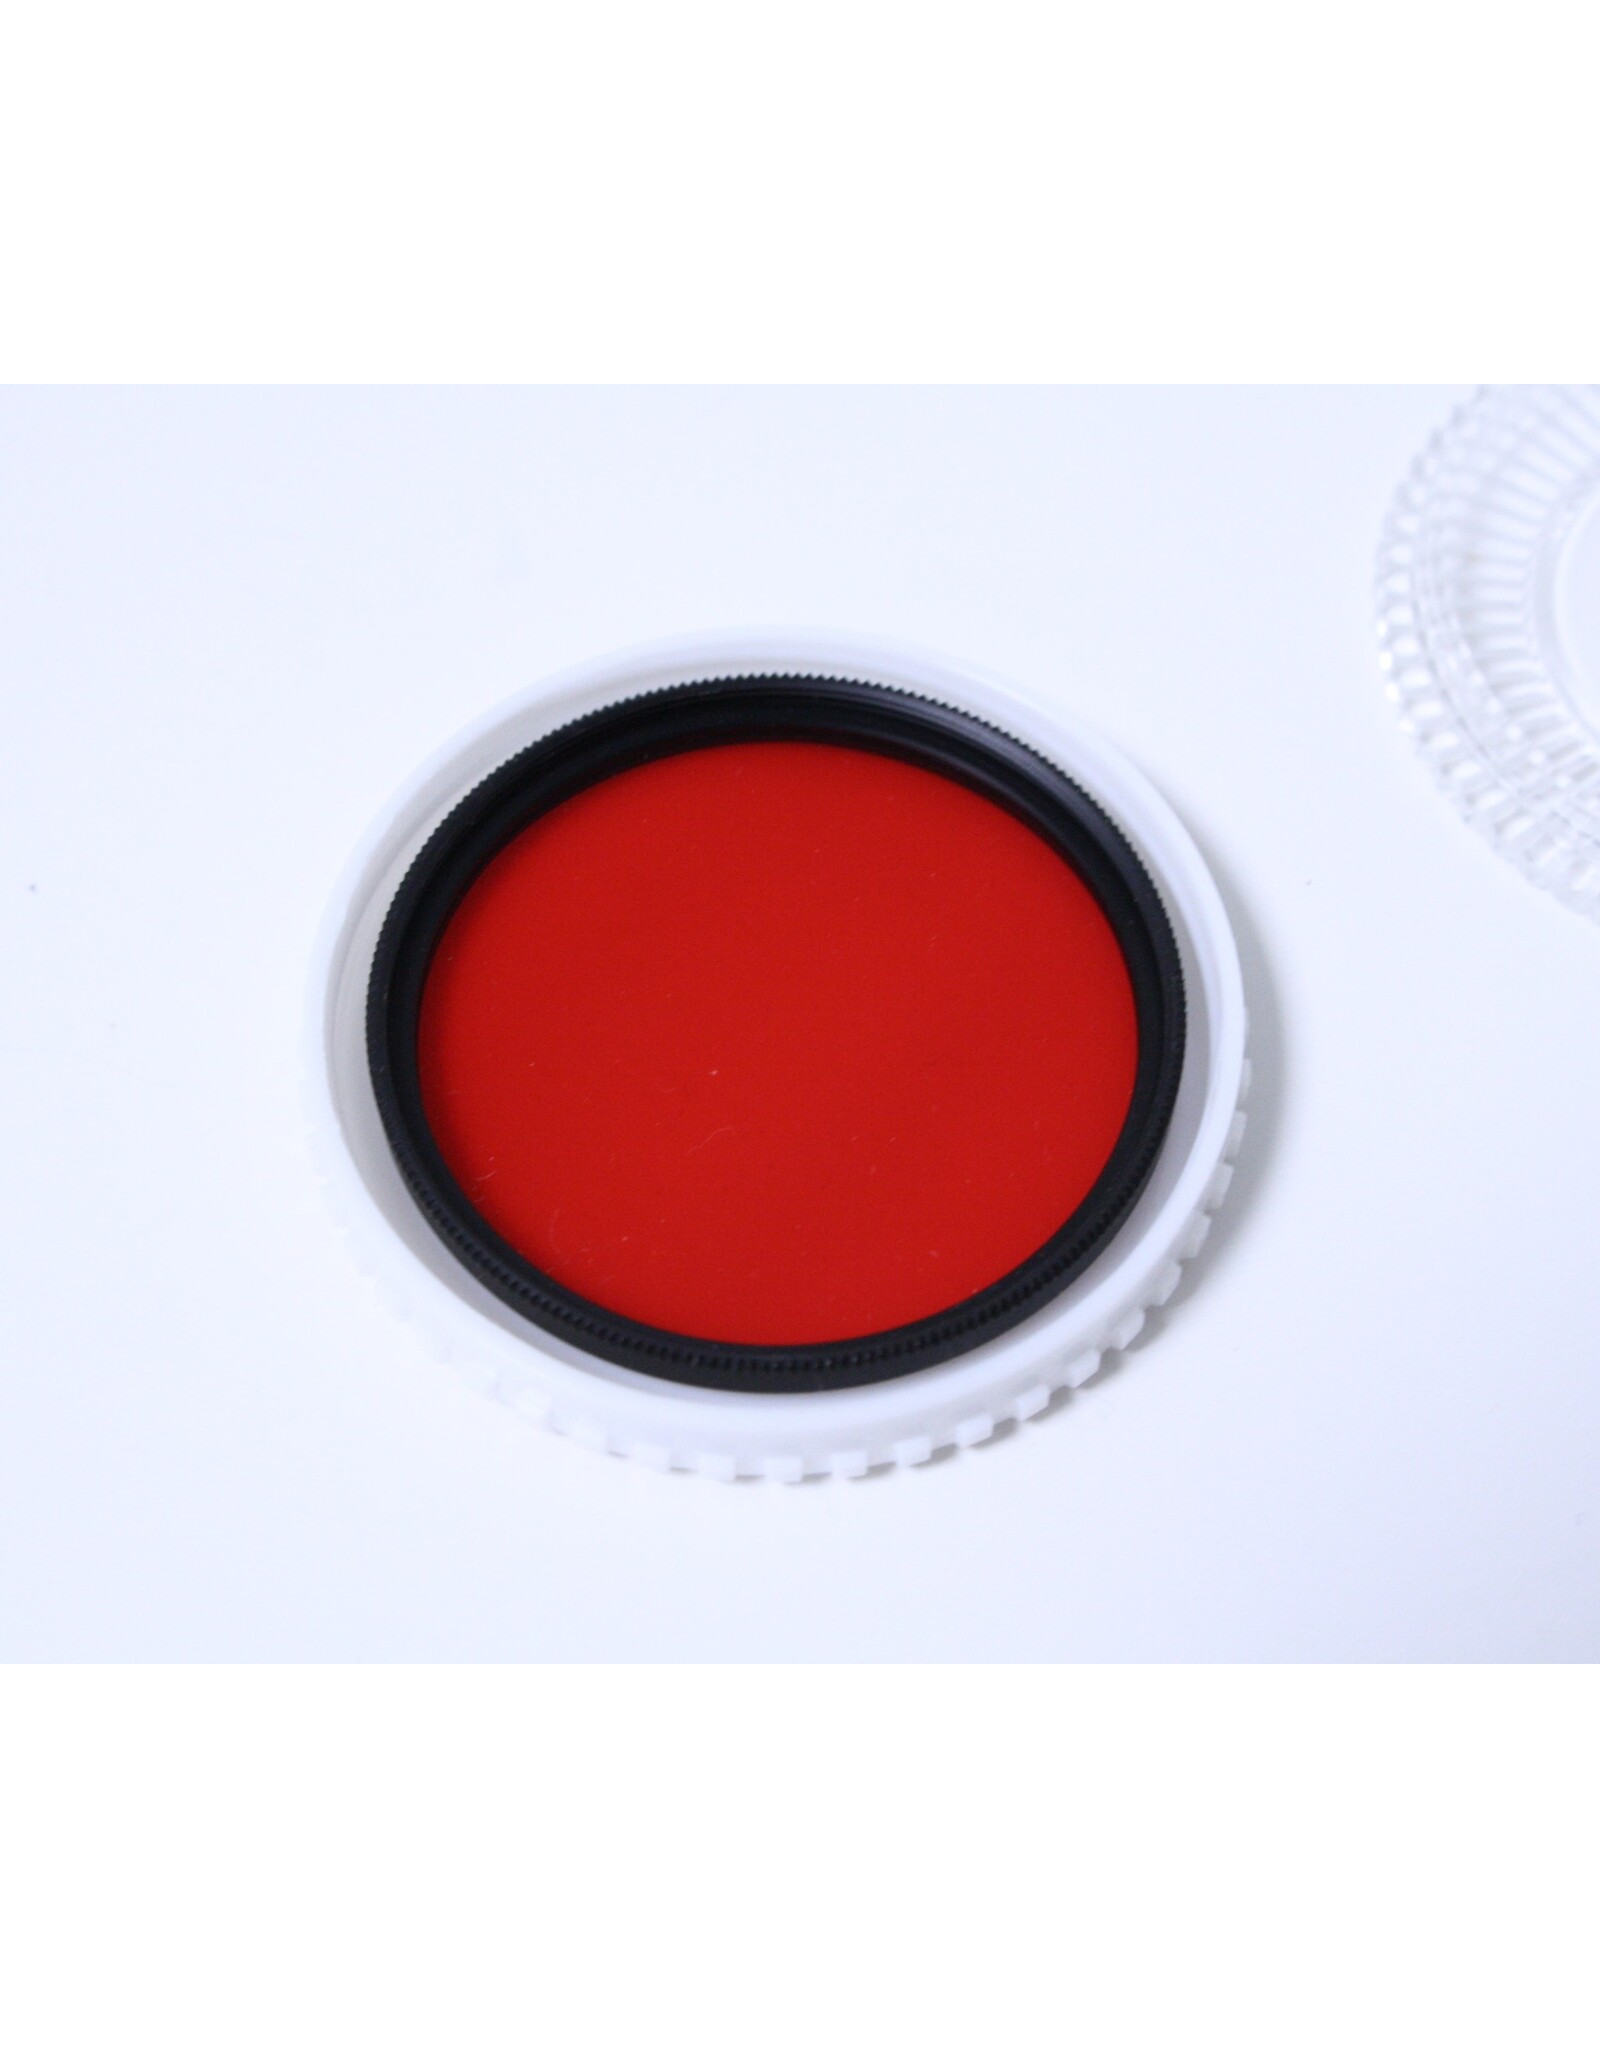 Nikon 52mm R60 Red Filter  (Pre-owned)